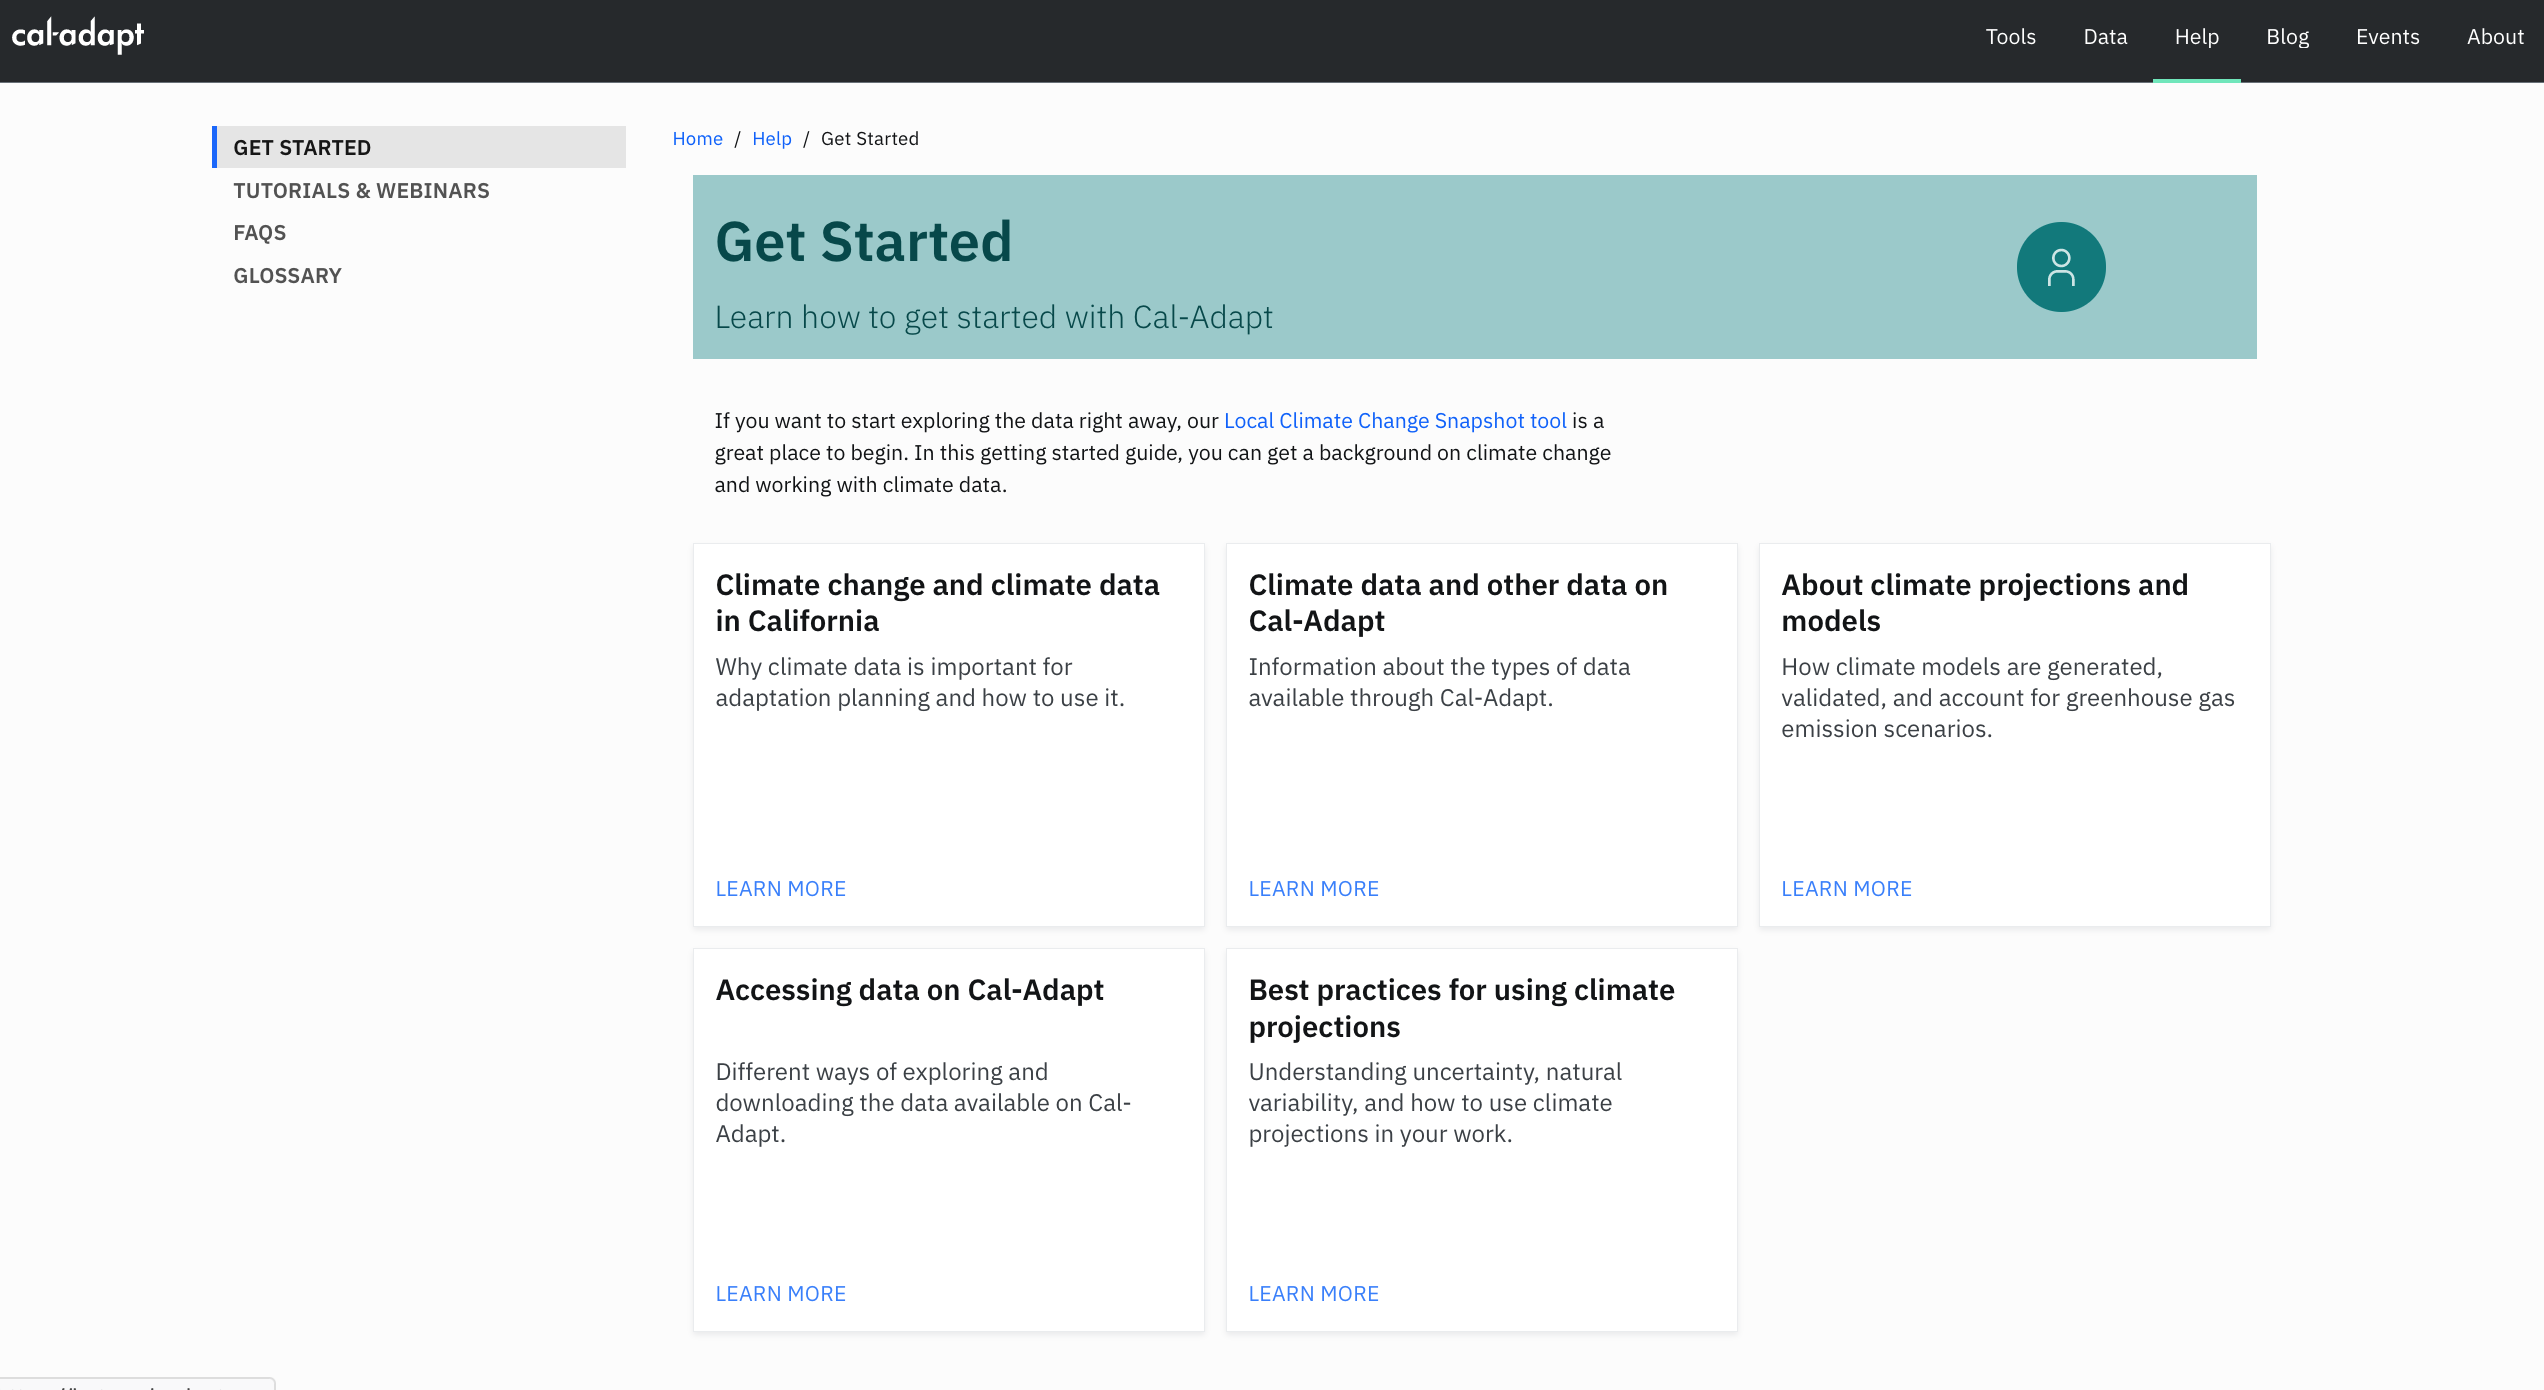 Screenshot of the Get Started with caladapt guide